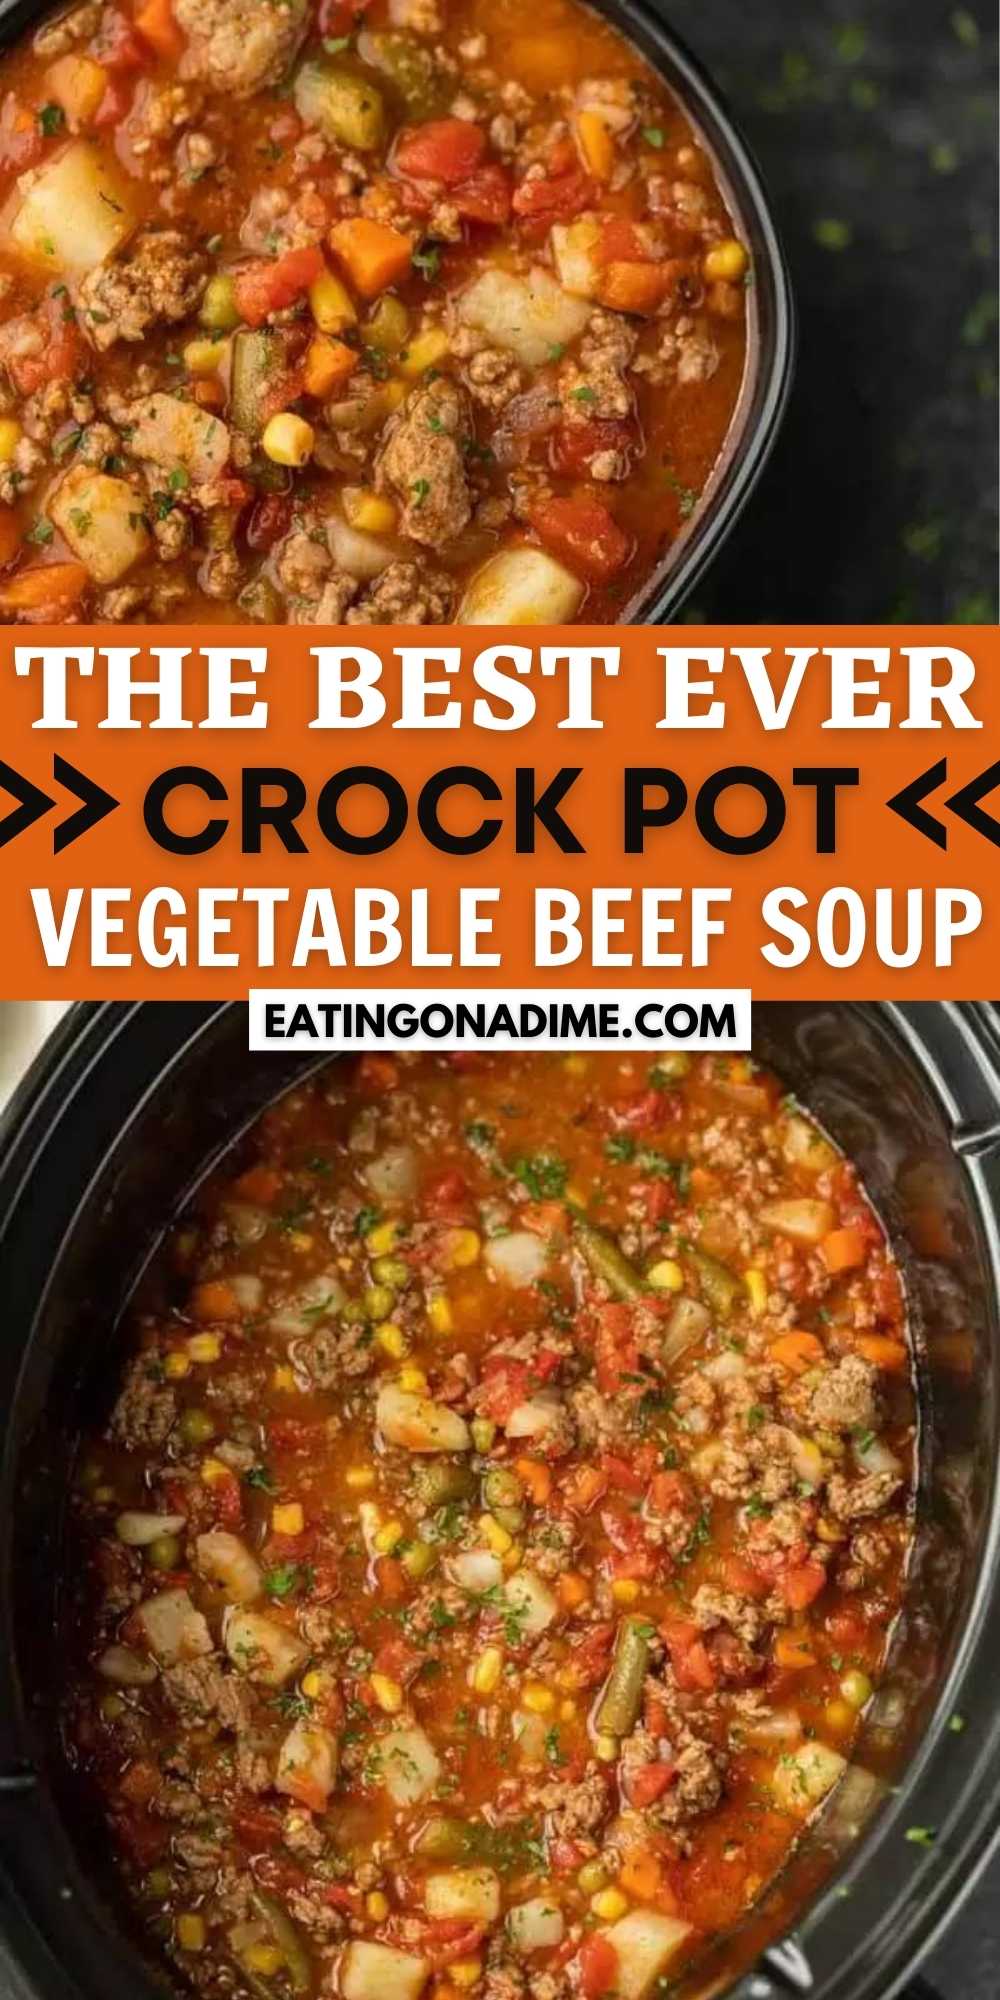 Crockpot vegetable beef soup recipe (+VIDEO) – Eating on a Dime